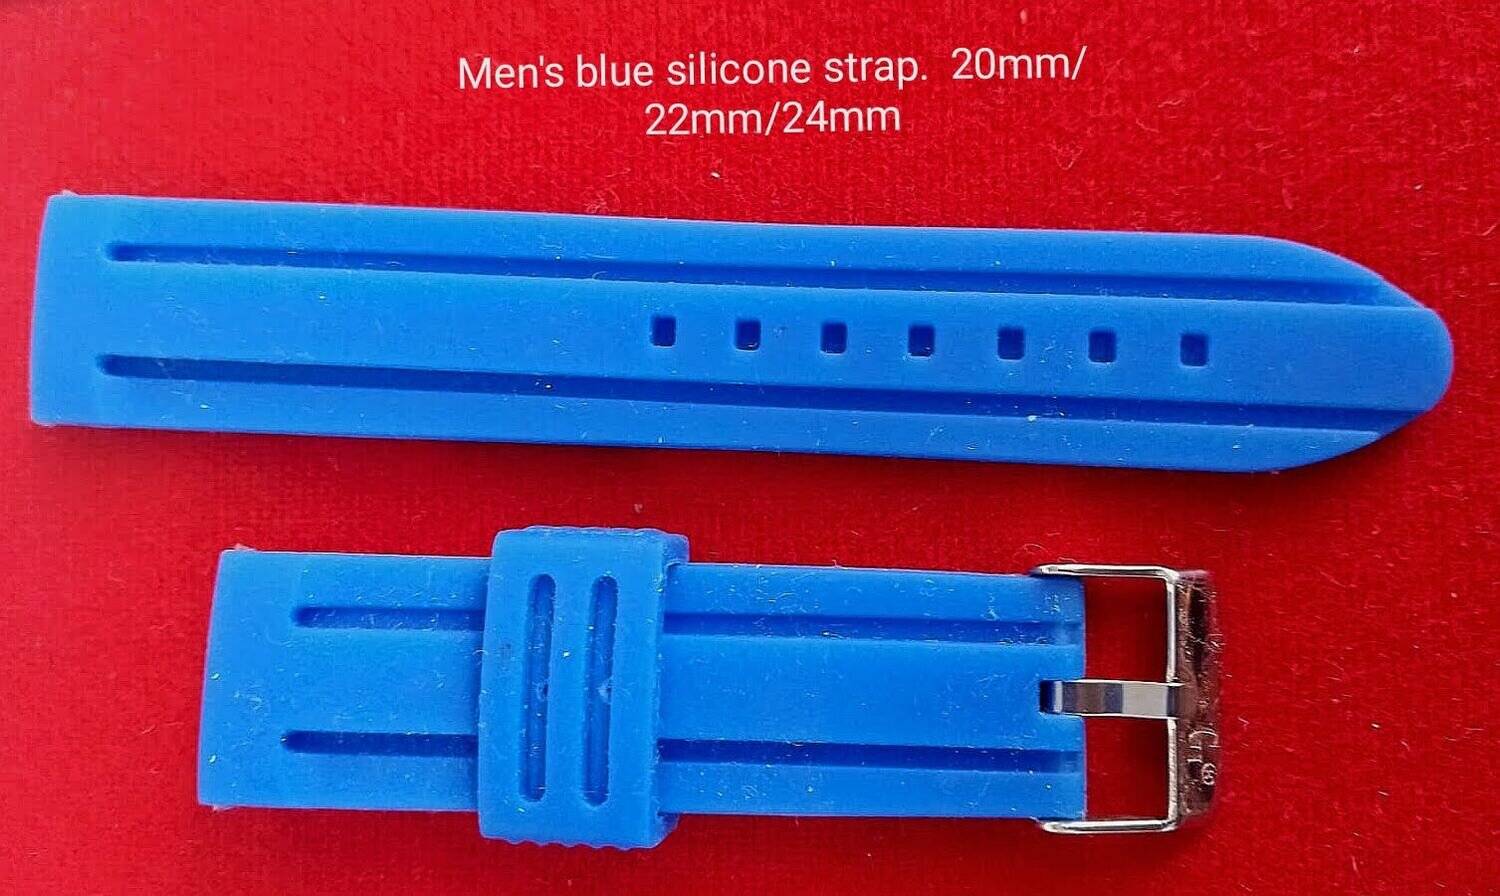 Men's blue silicone strap 20mm/22mm/24mm